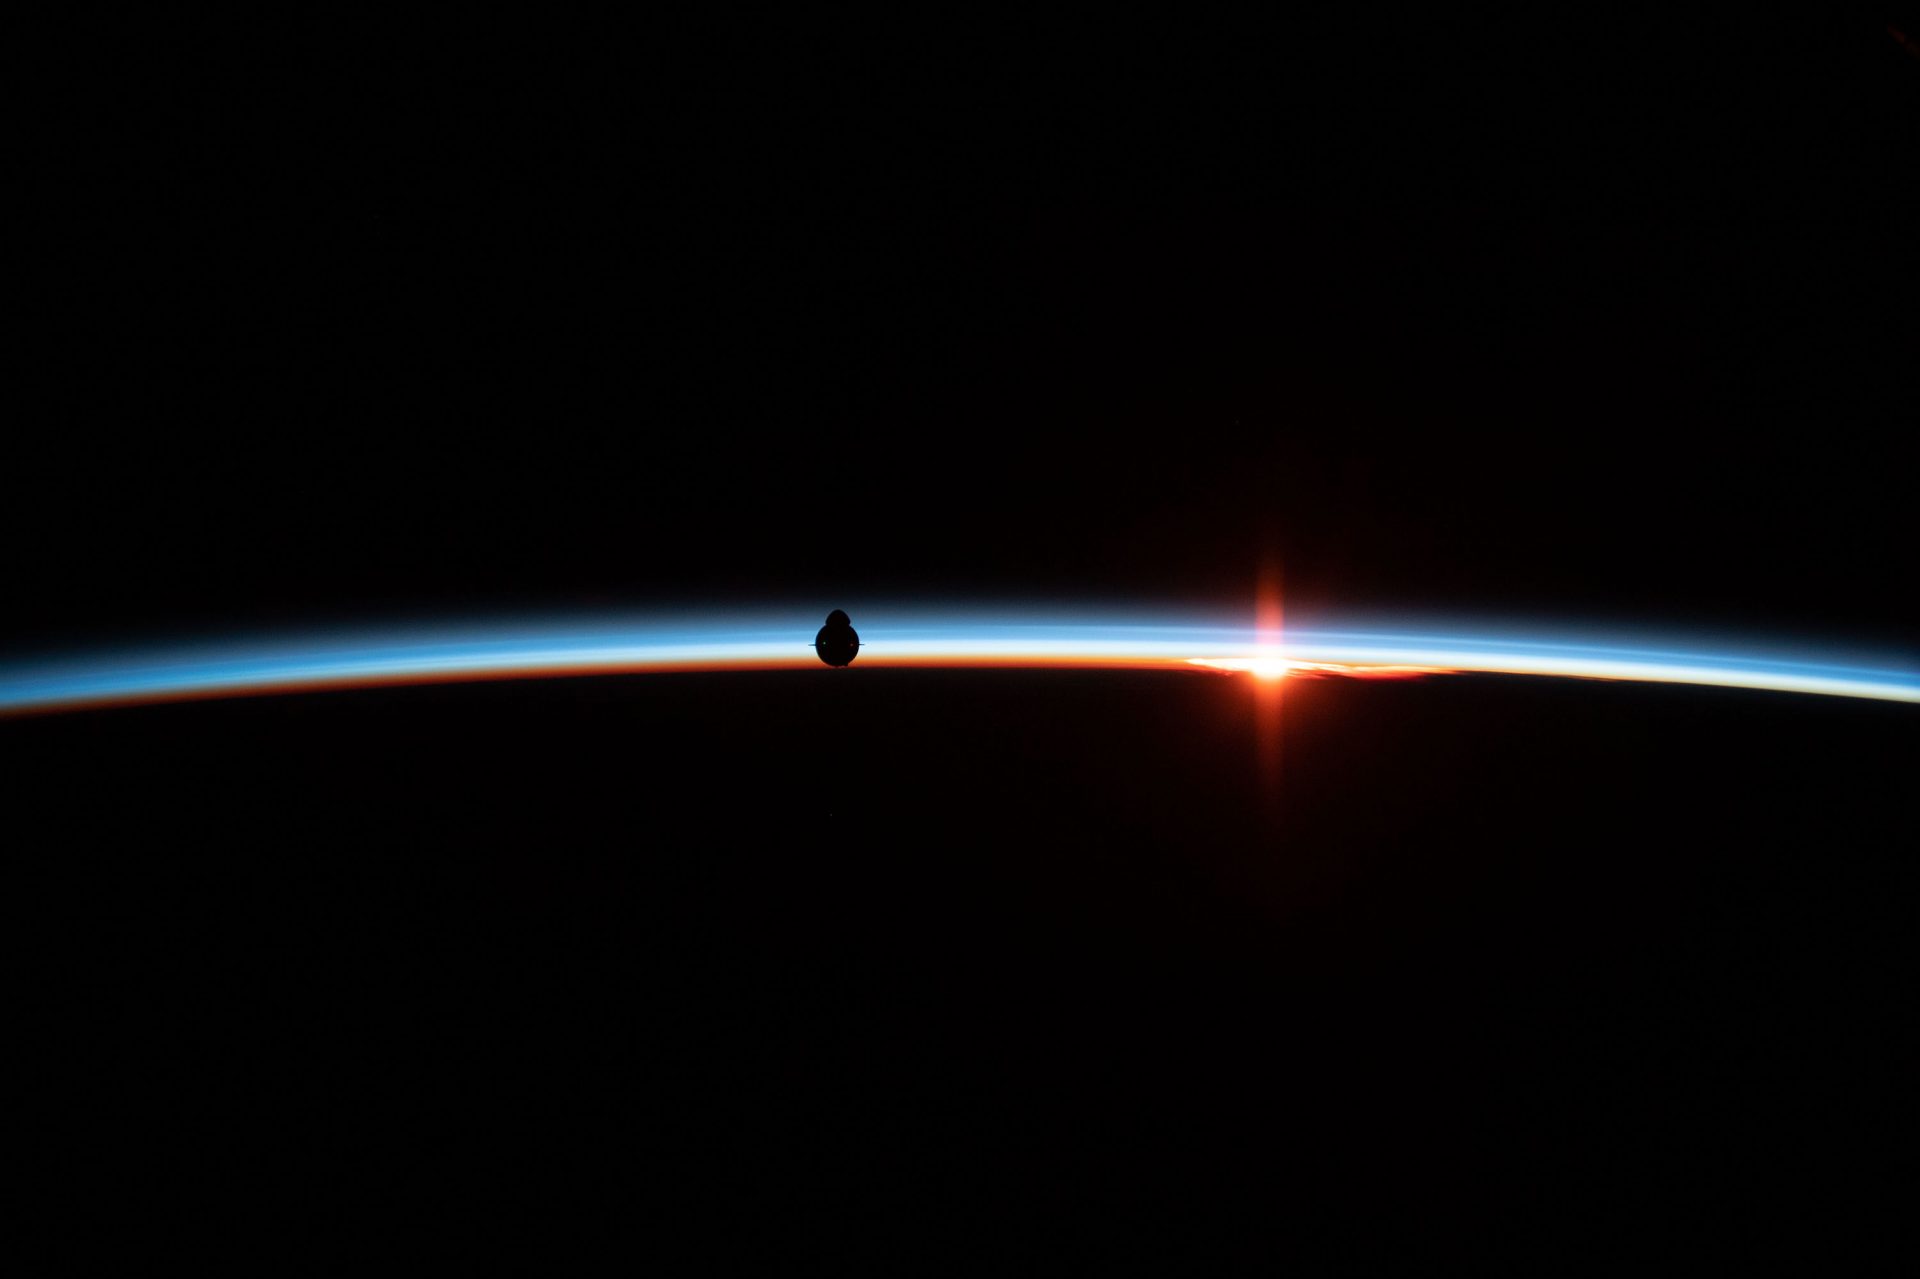 An uncrewed Dragon spacecraft is silhouetted against the Earth's horizon. The vehicle docked with the International Space Station and returned to Earth in 2019 as a dry run for the current mission.